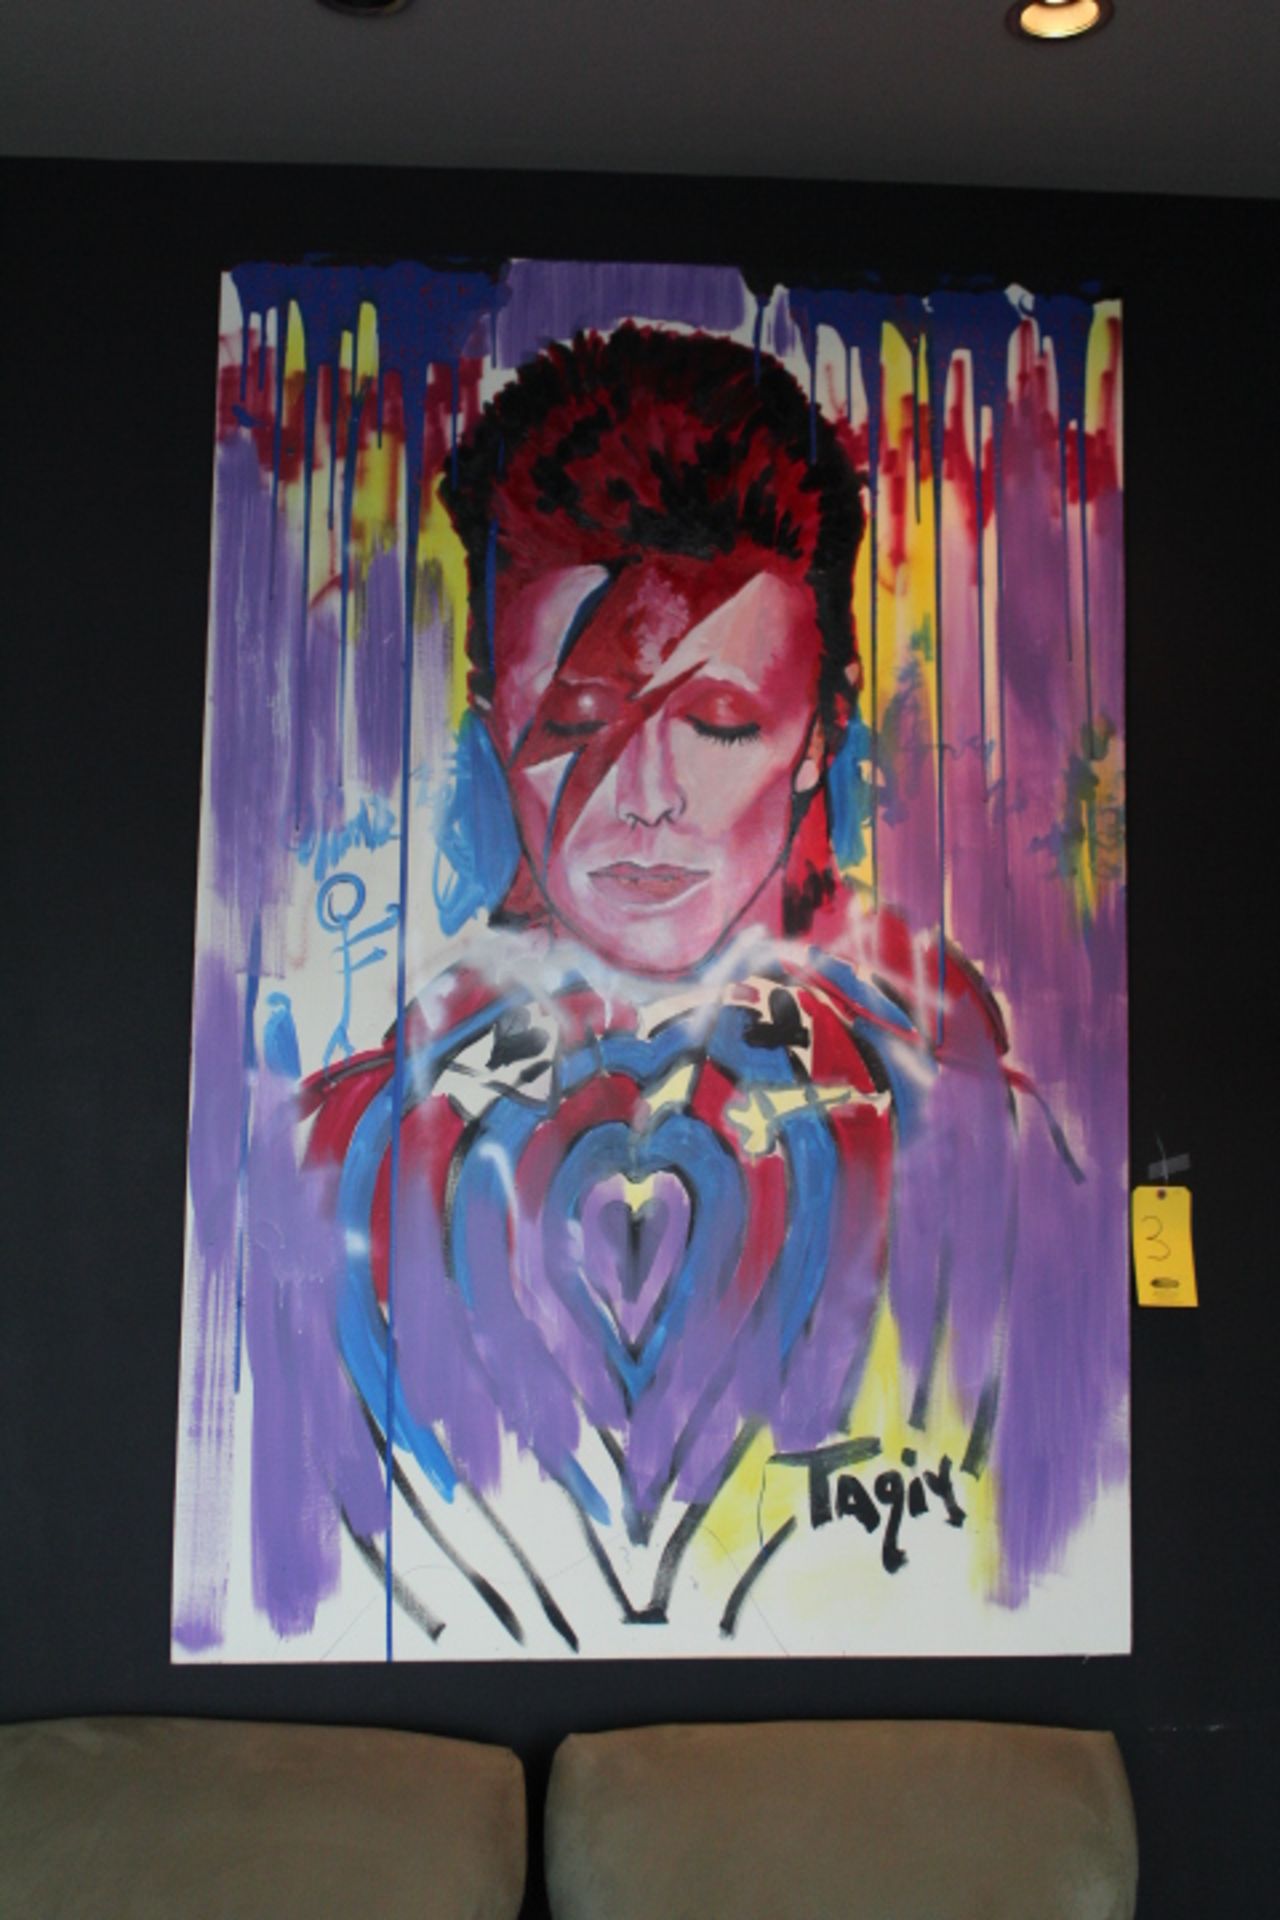 4' X 6' DAVID BOWIE OIL PAINTING SIGNED IVBEN TAQIY